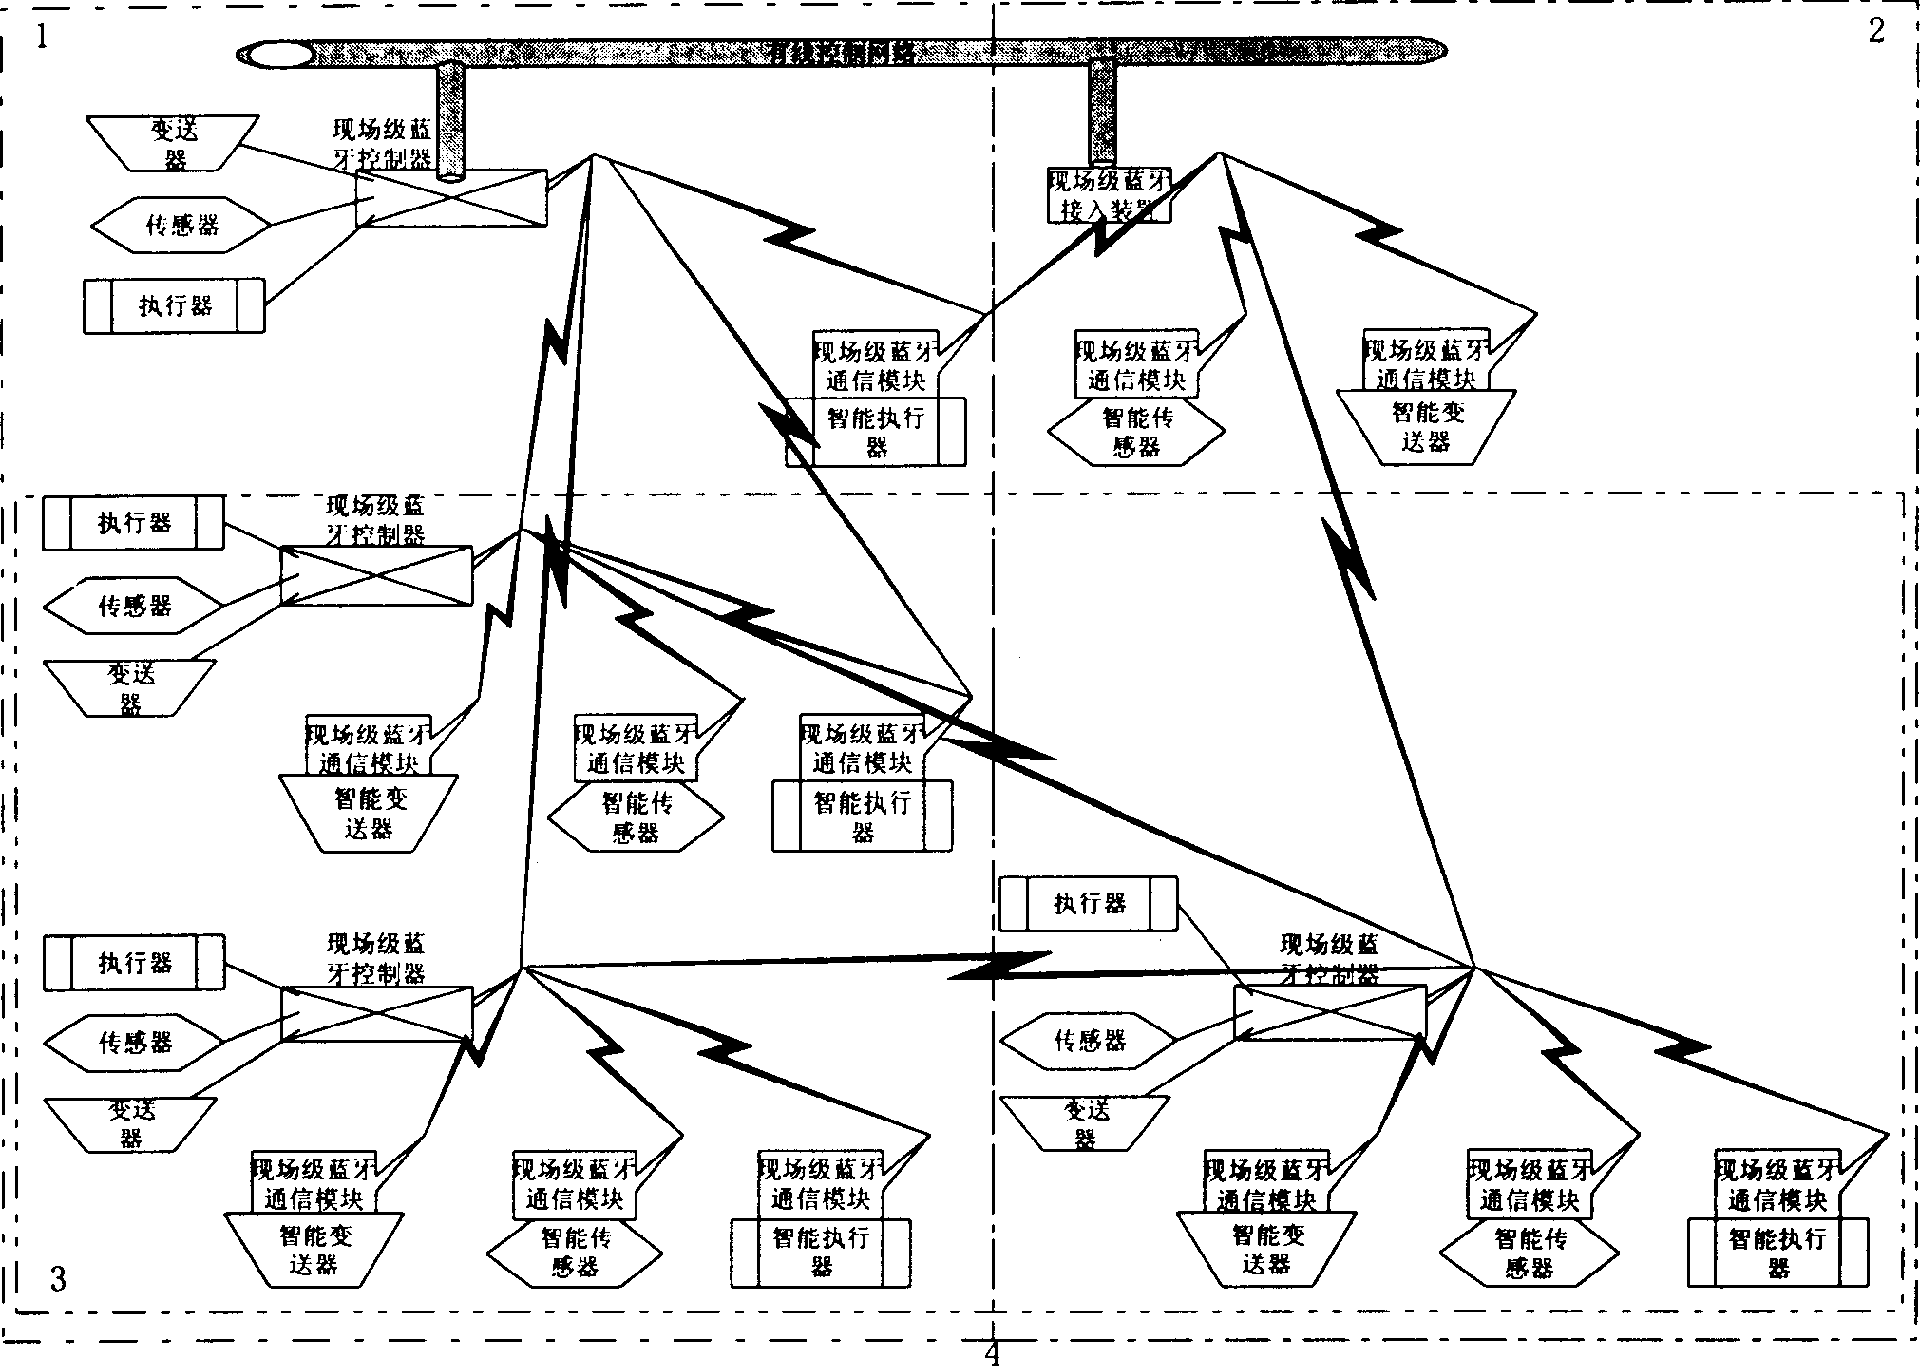 Method and system of controlling network communication of automation based on blue-tooth technique